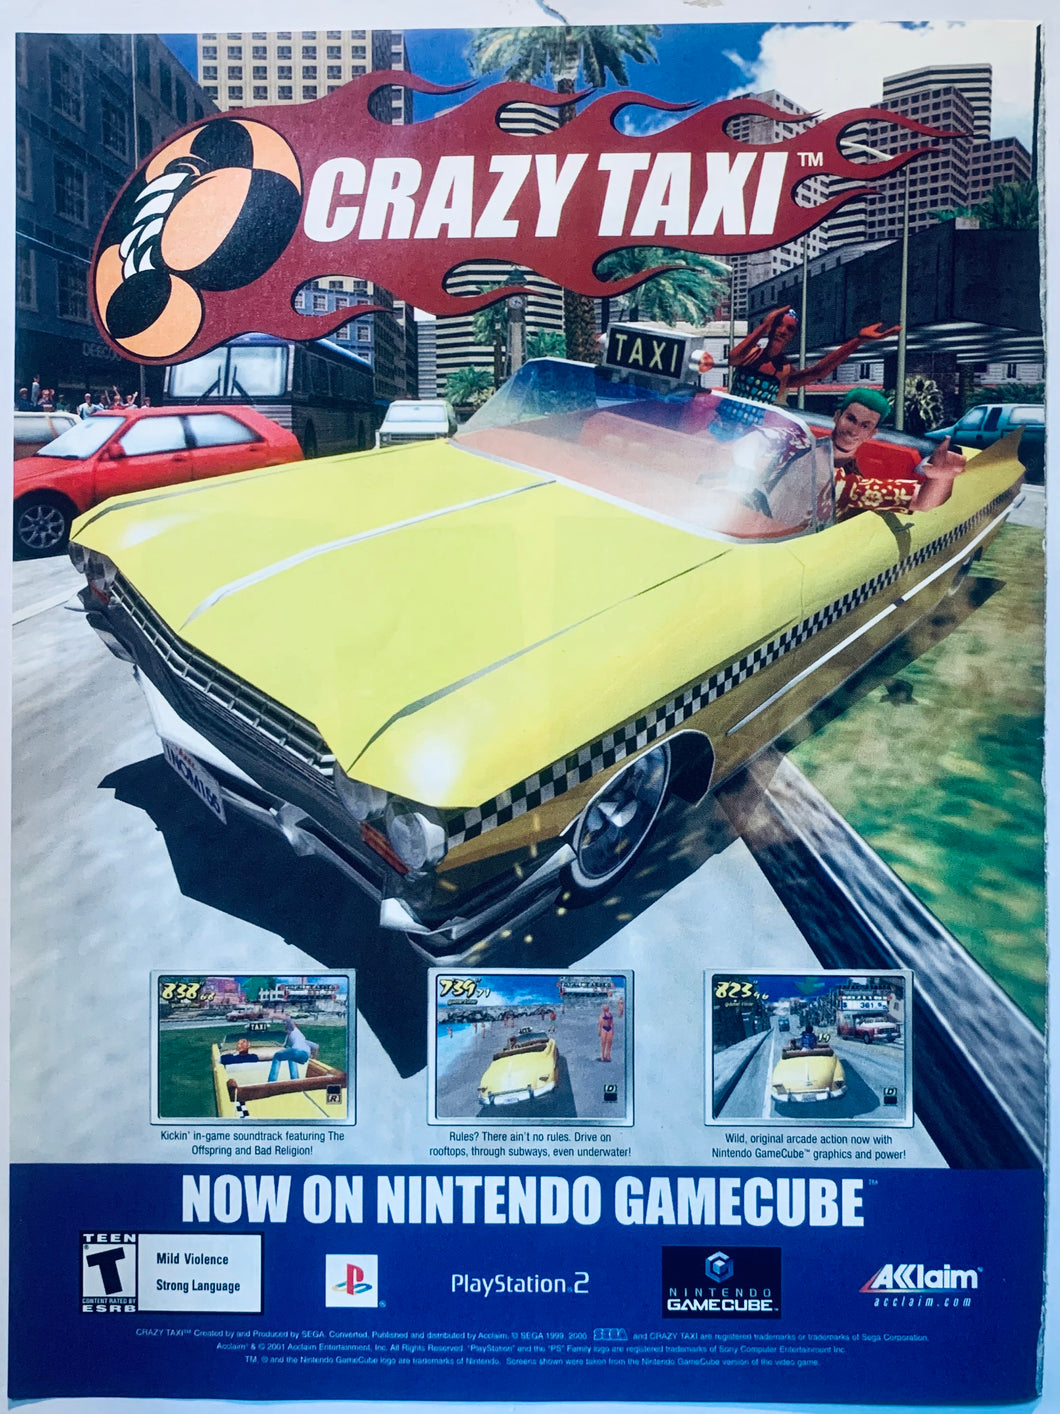 Crazy Taxi - NGC PS2 - Original Vintage Advertisement - Print Ads - Laminated A4 Poster